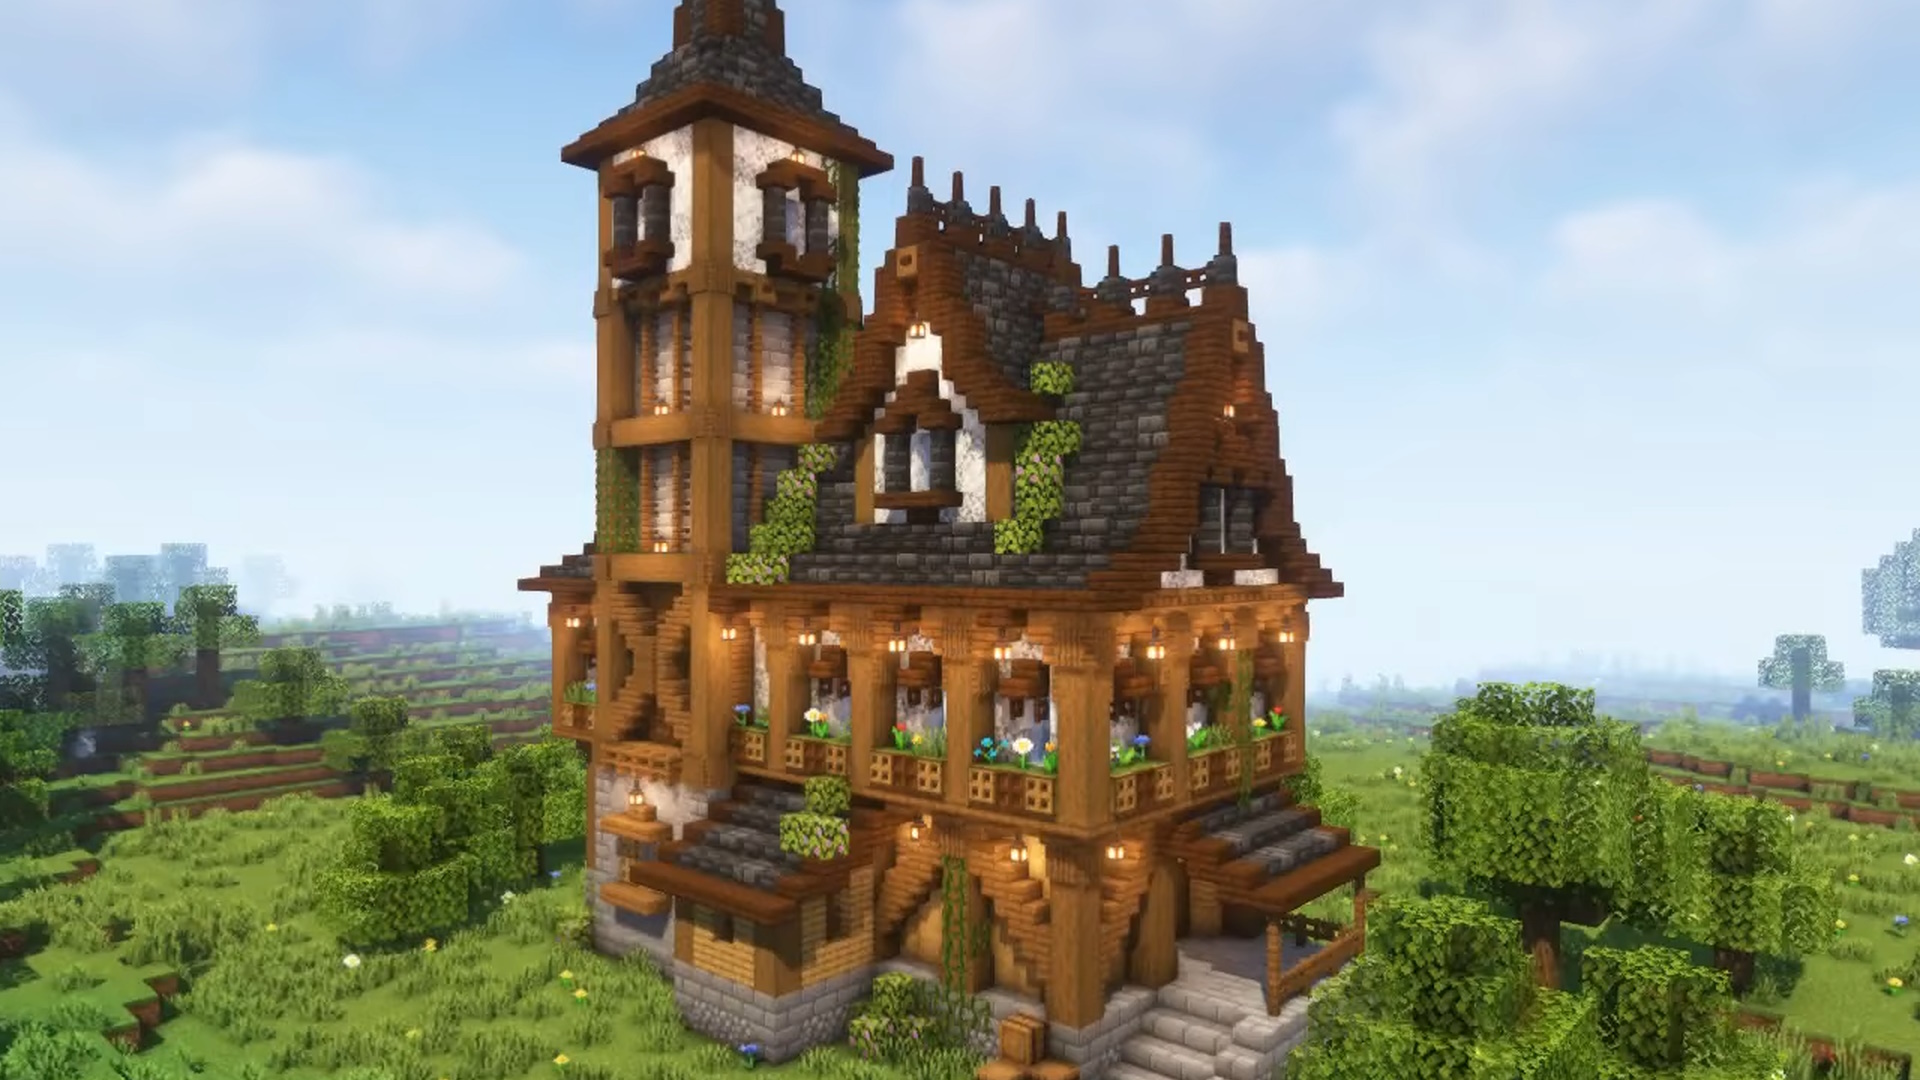 Minecraft  How to Build a Medieval House With Basement 